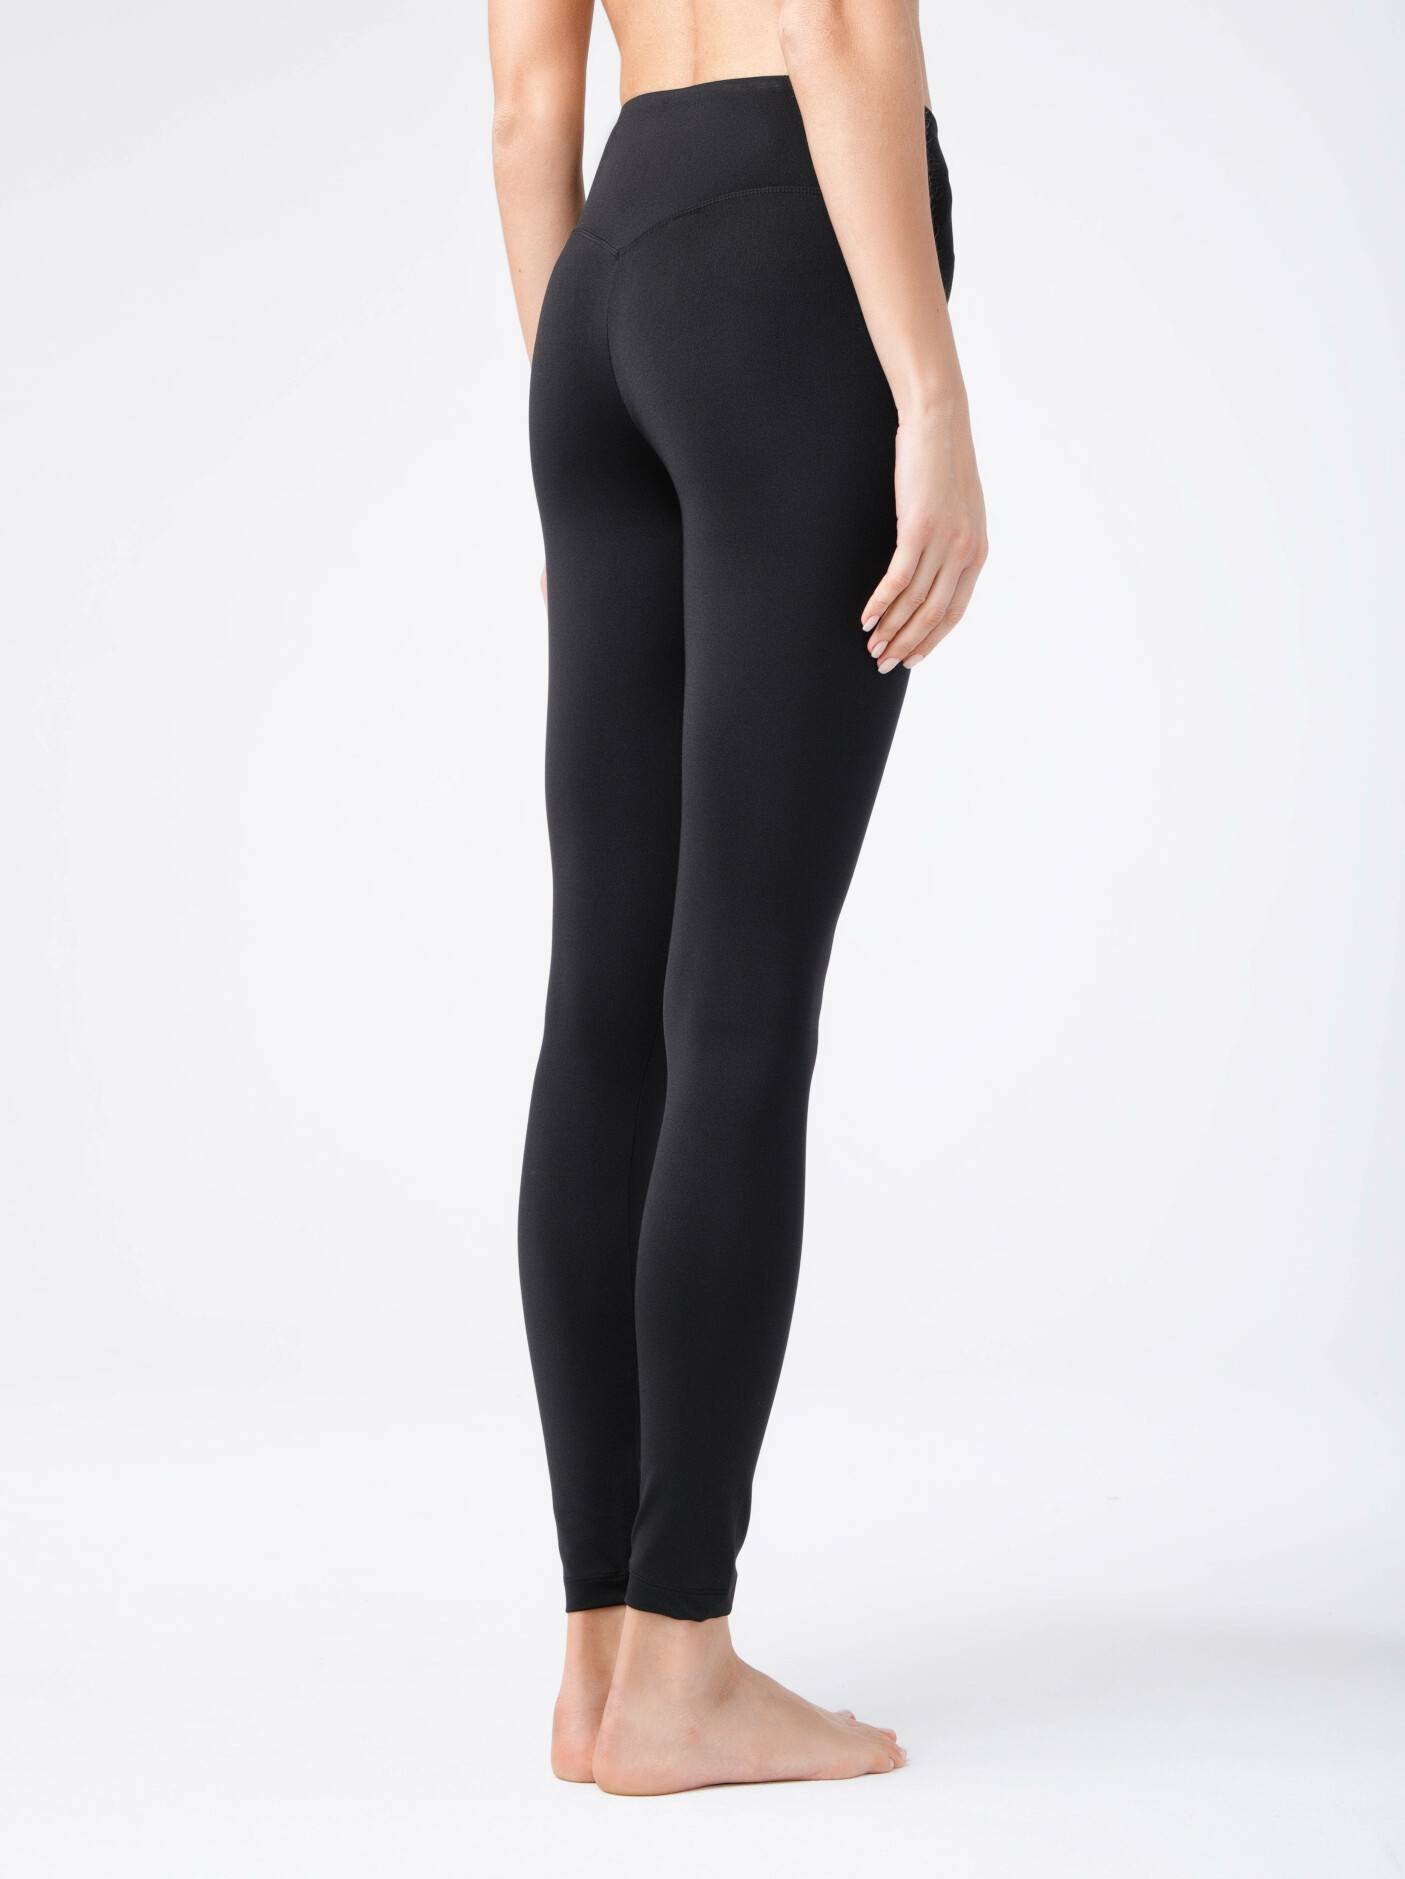 leggings leggings with a wide belt belly correction STYLE LINE ...